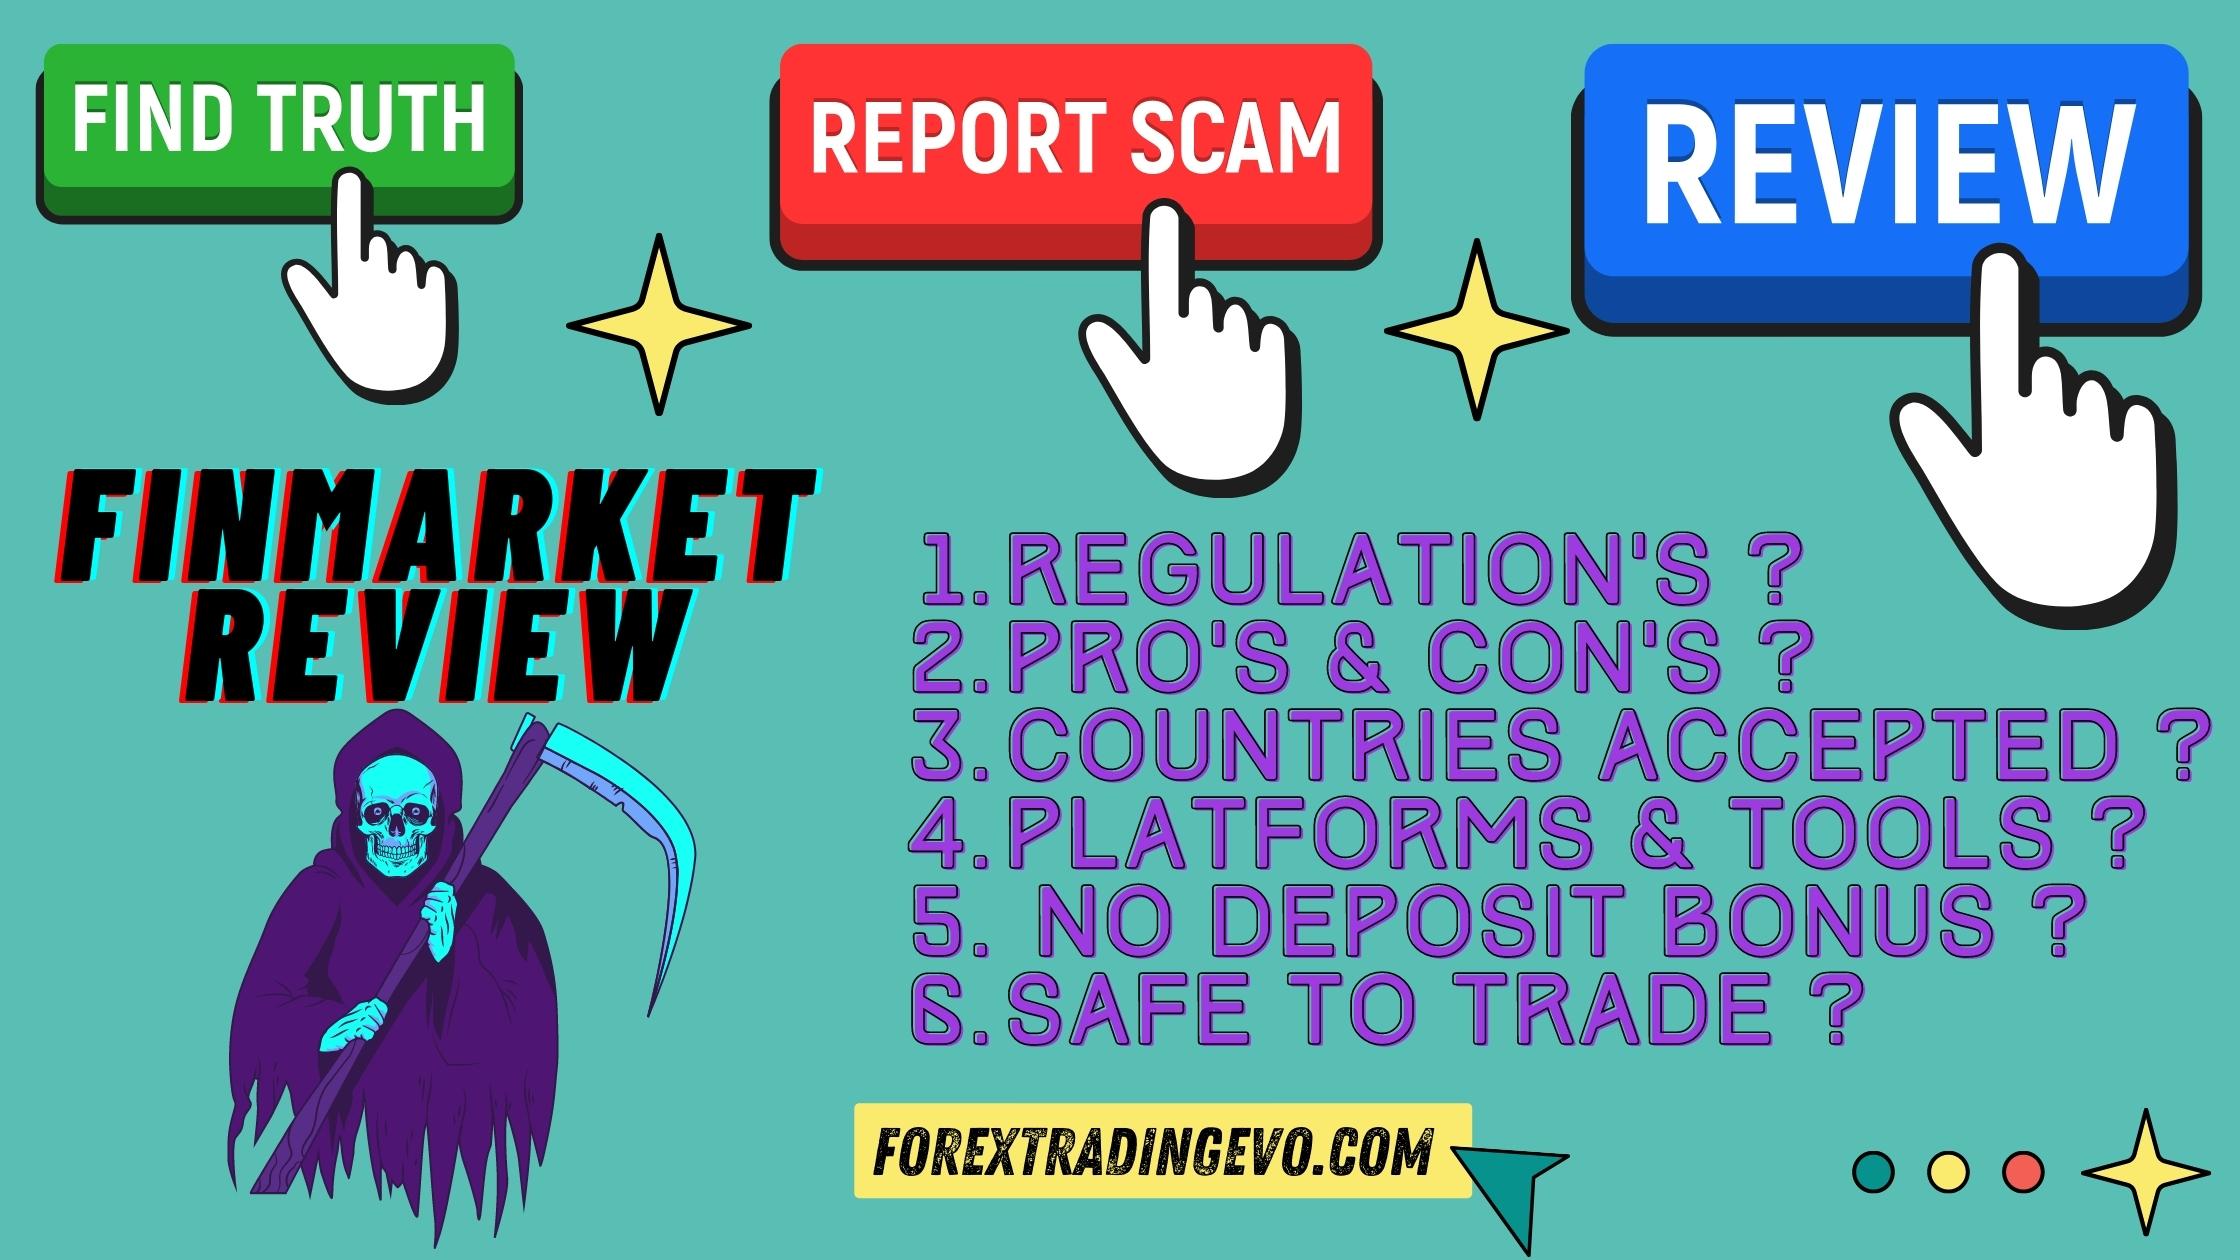 Finmarket Review